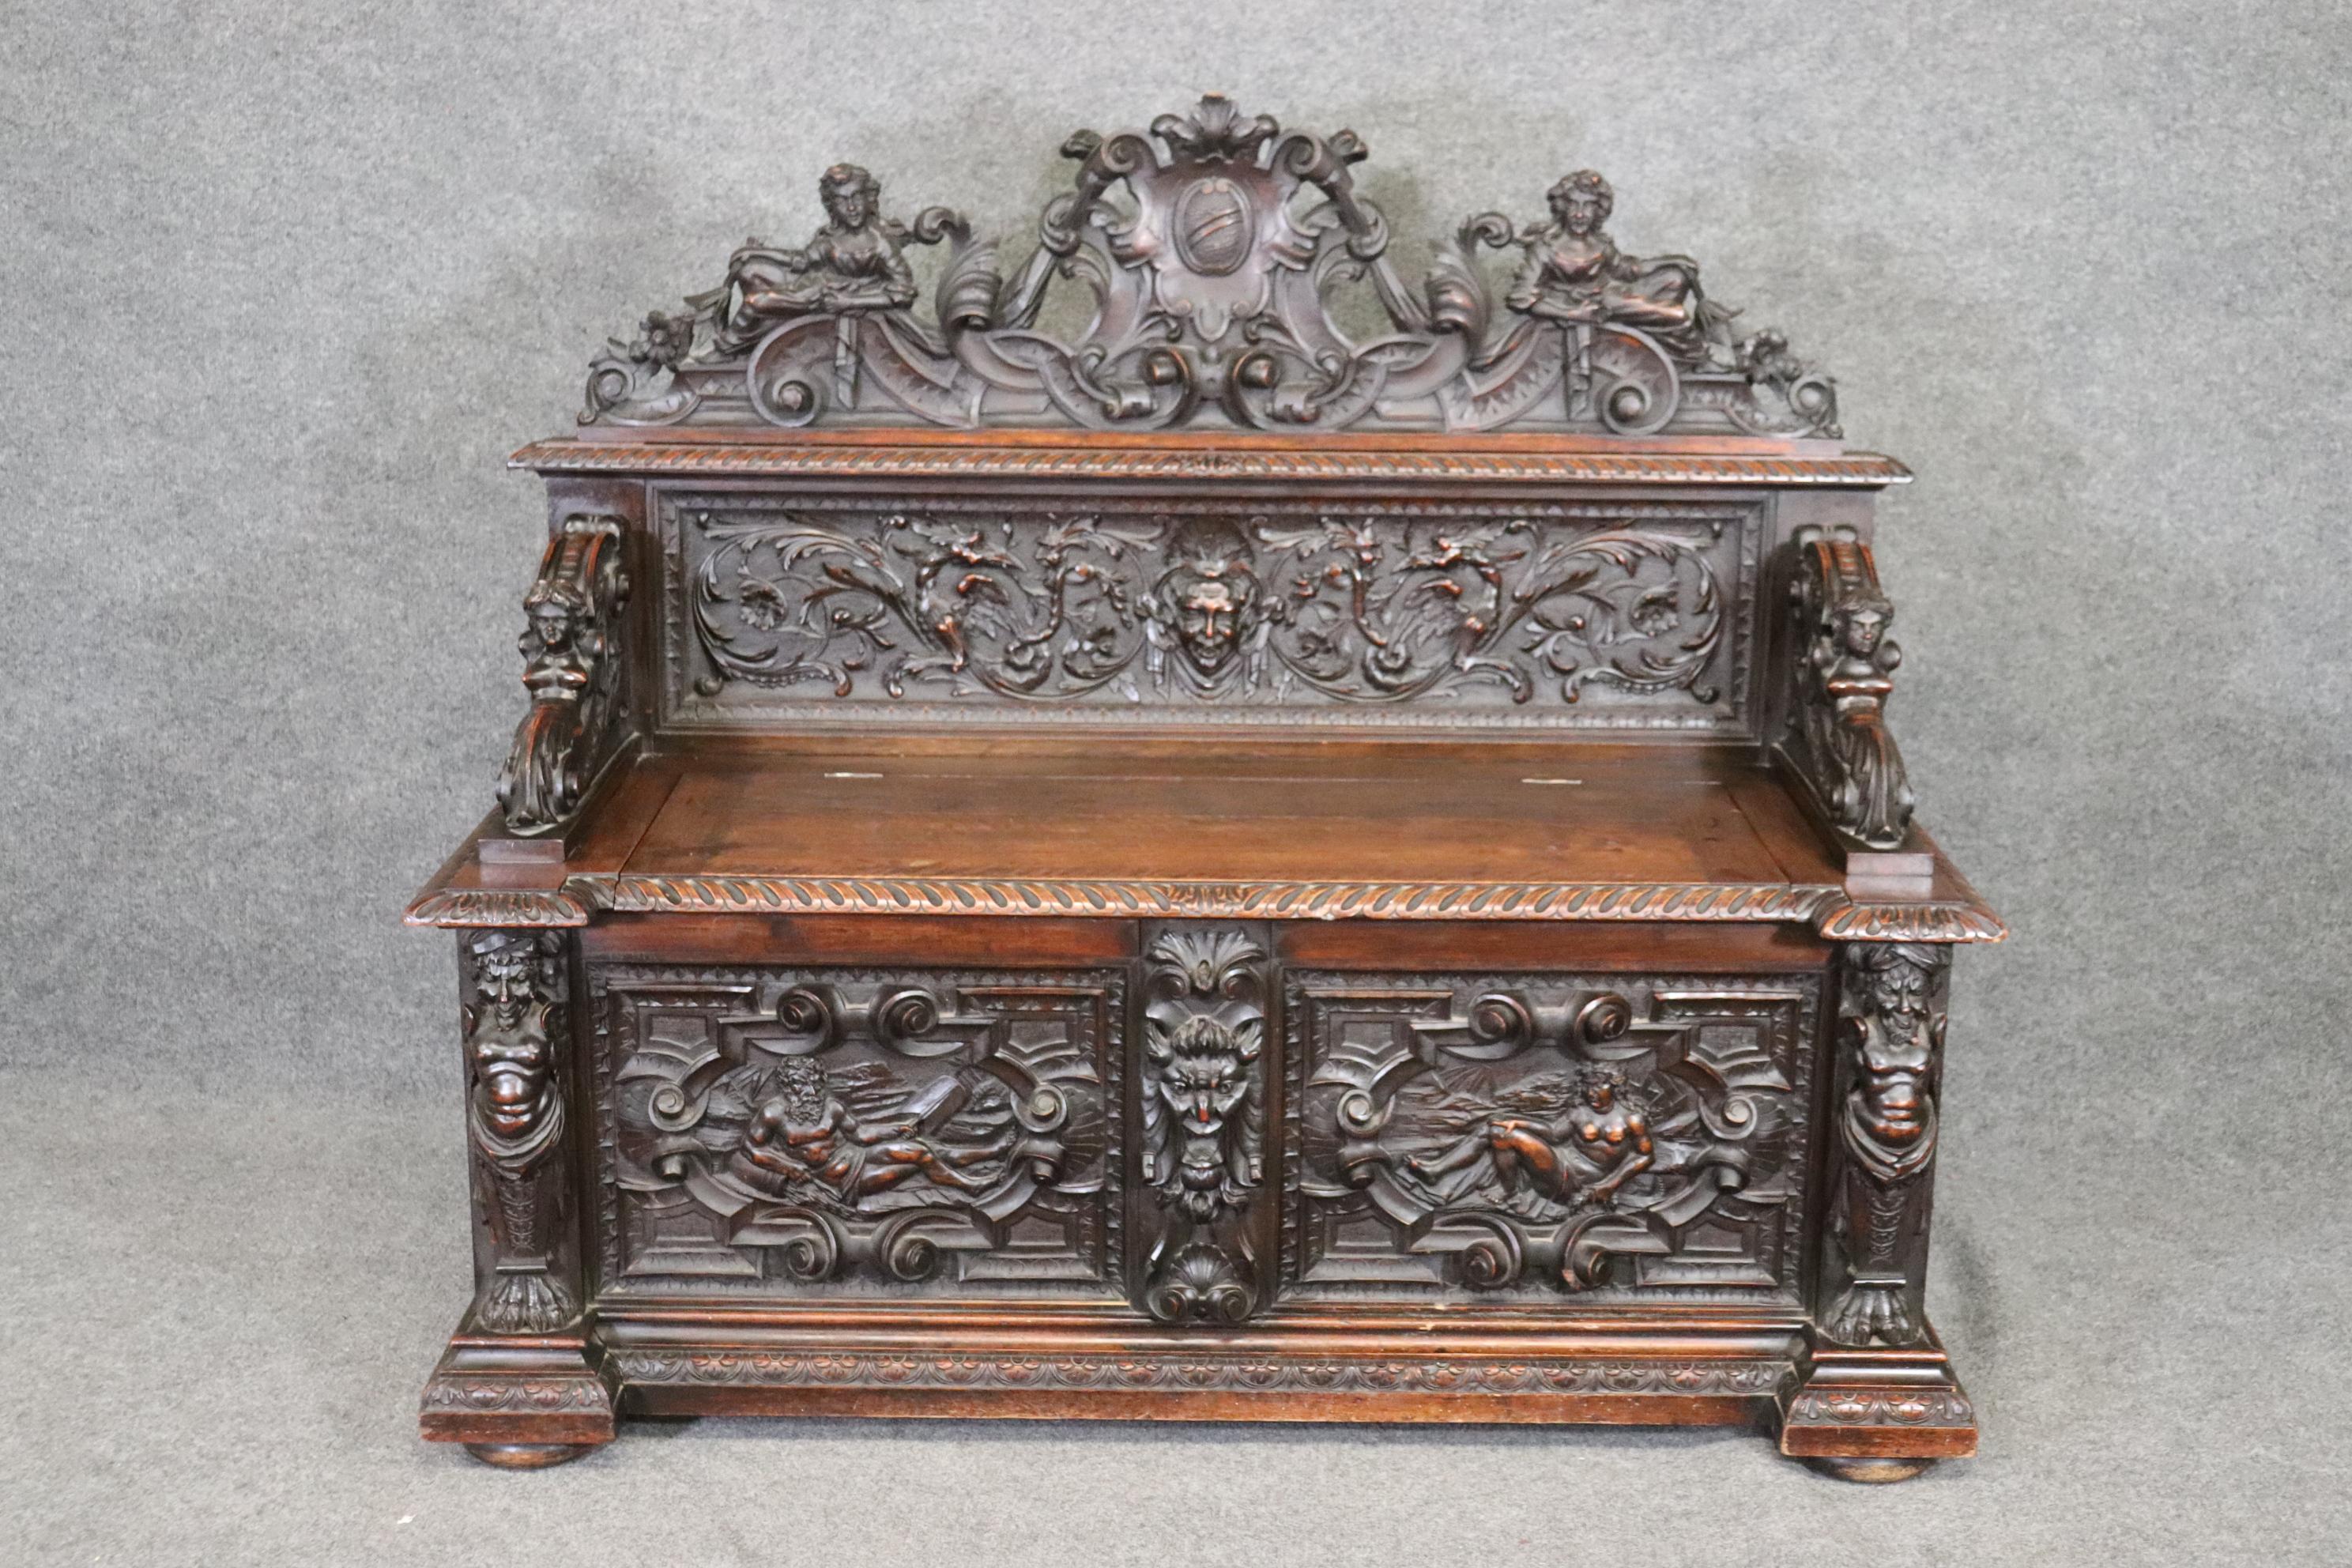 This is an incredibly and profusely carved Italian Luigi Frullini or RJ Horner Style hall bench with every possible carved cherub, satyr and mythical creature. The piece is in good condition with no major issues and has a trunk for hiding away shoes